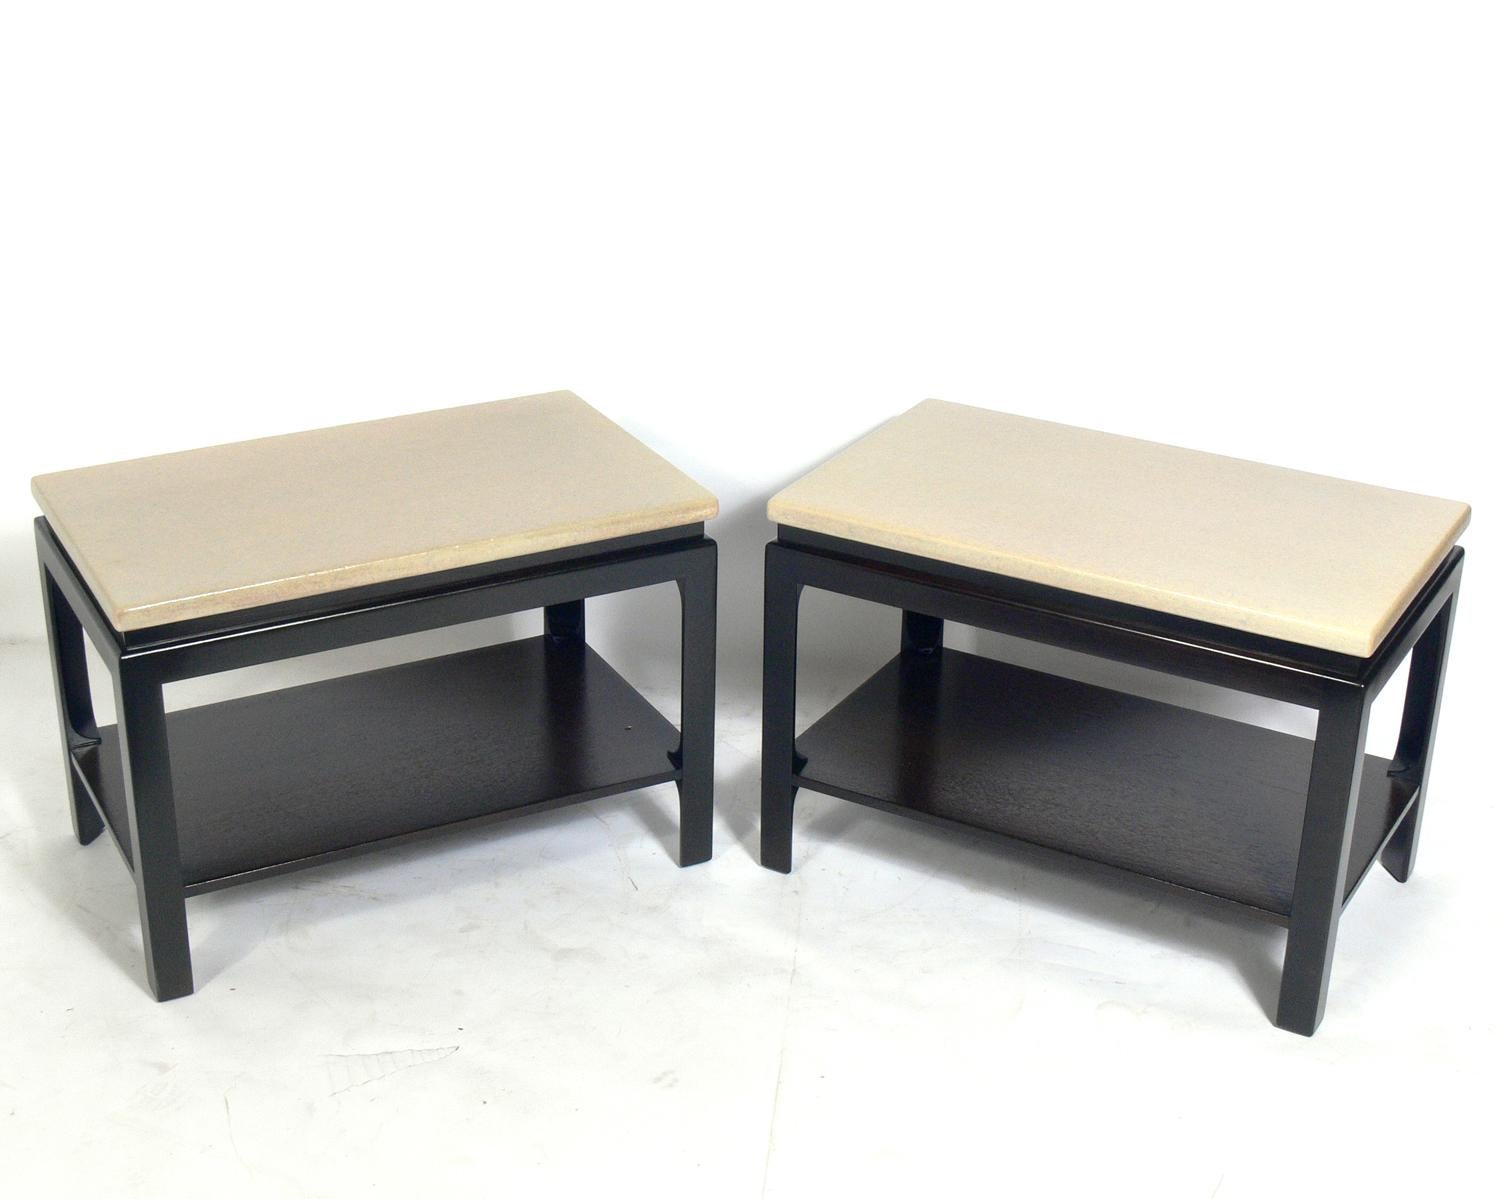 Pair of cork top end tables, designed by Paul Frankl for Johnson Furniture, American, circa 1940s. The clean lined form of these tables exhibit the Asian influences seen in many of Frankl's designs from this period. They have been refinished in